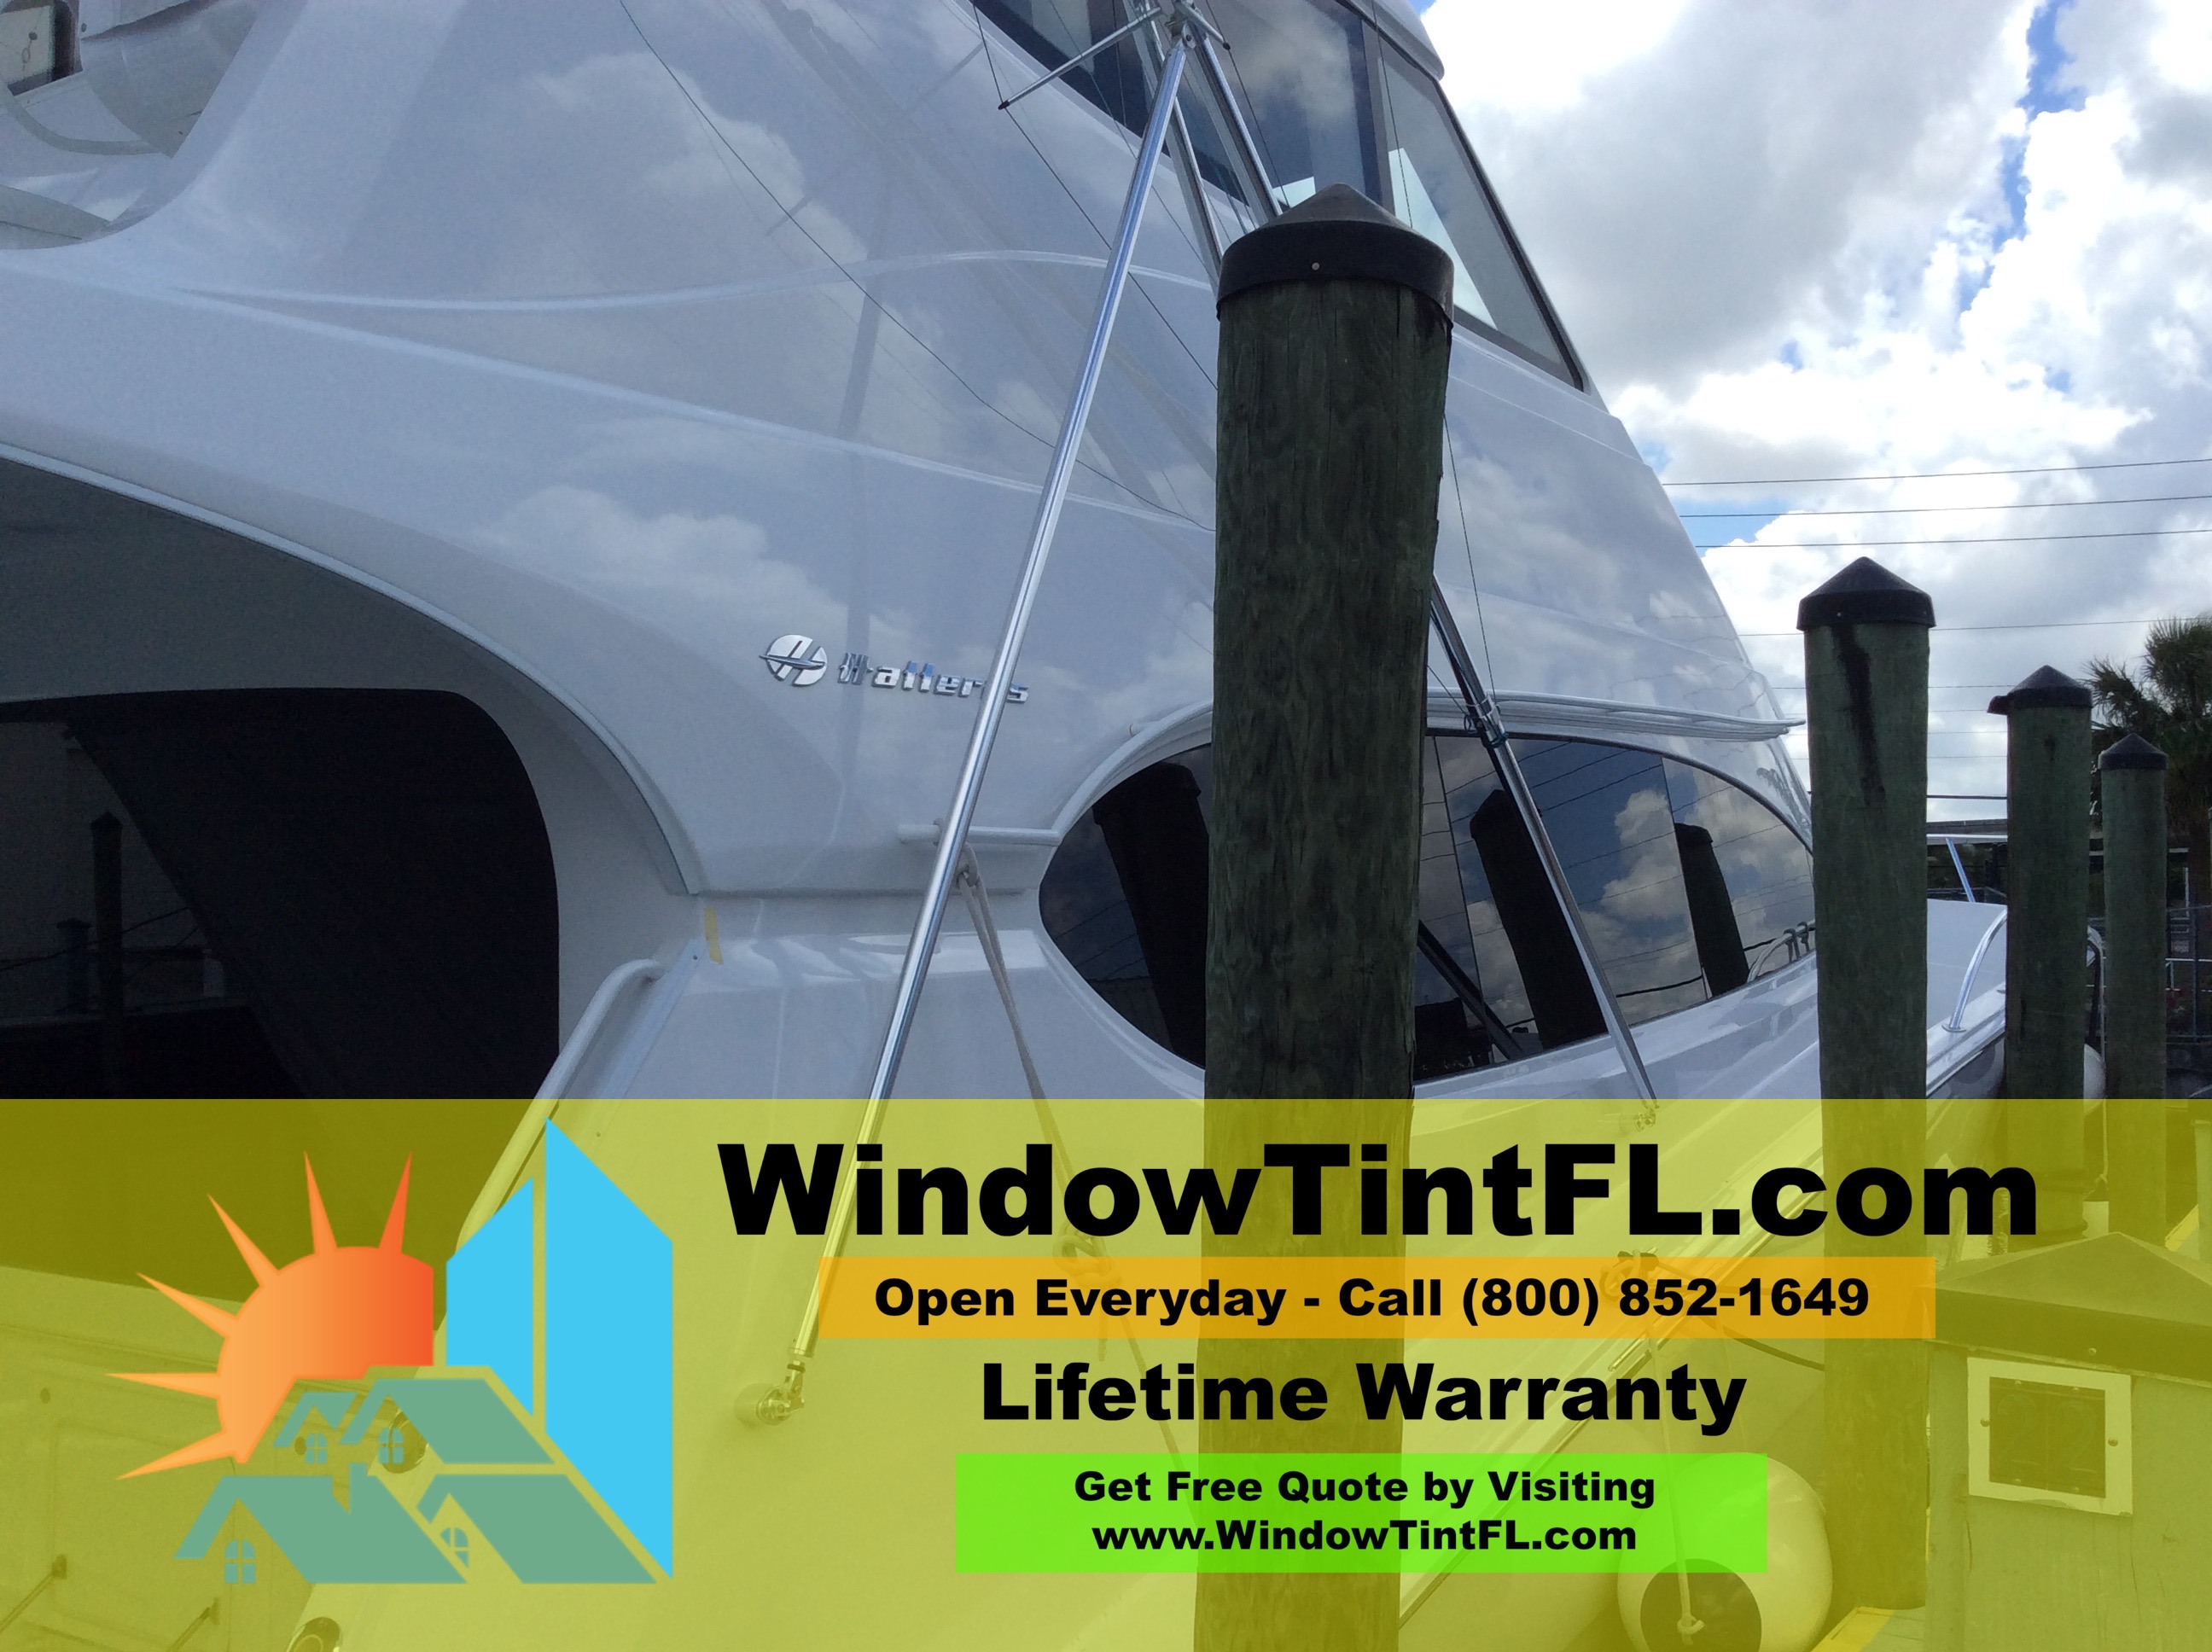 Ft Lauderdale Boat Window Tinting